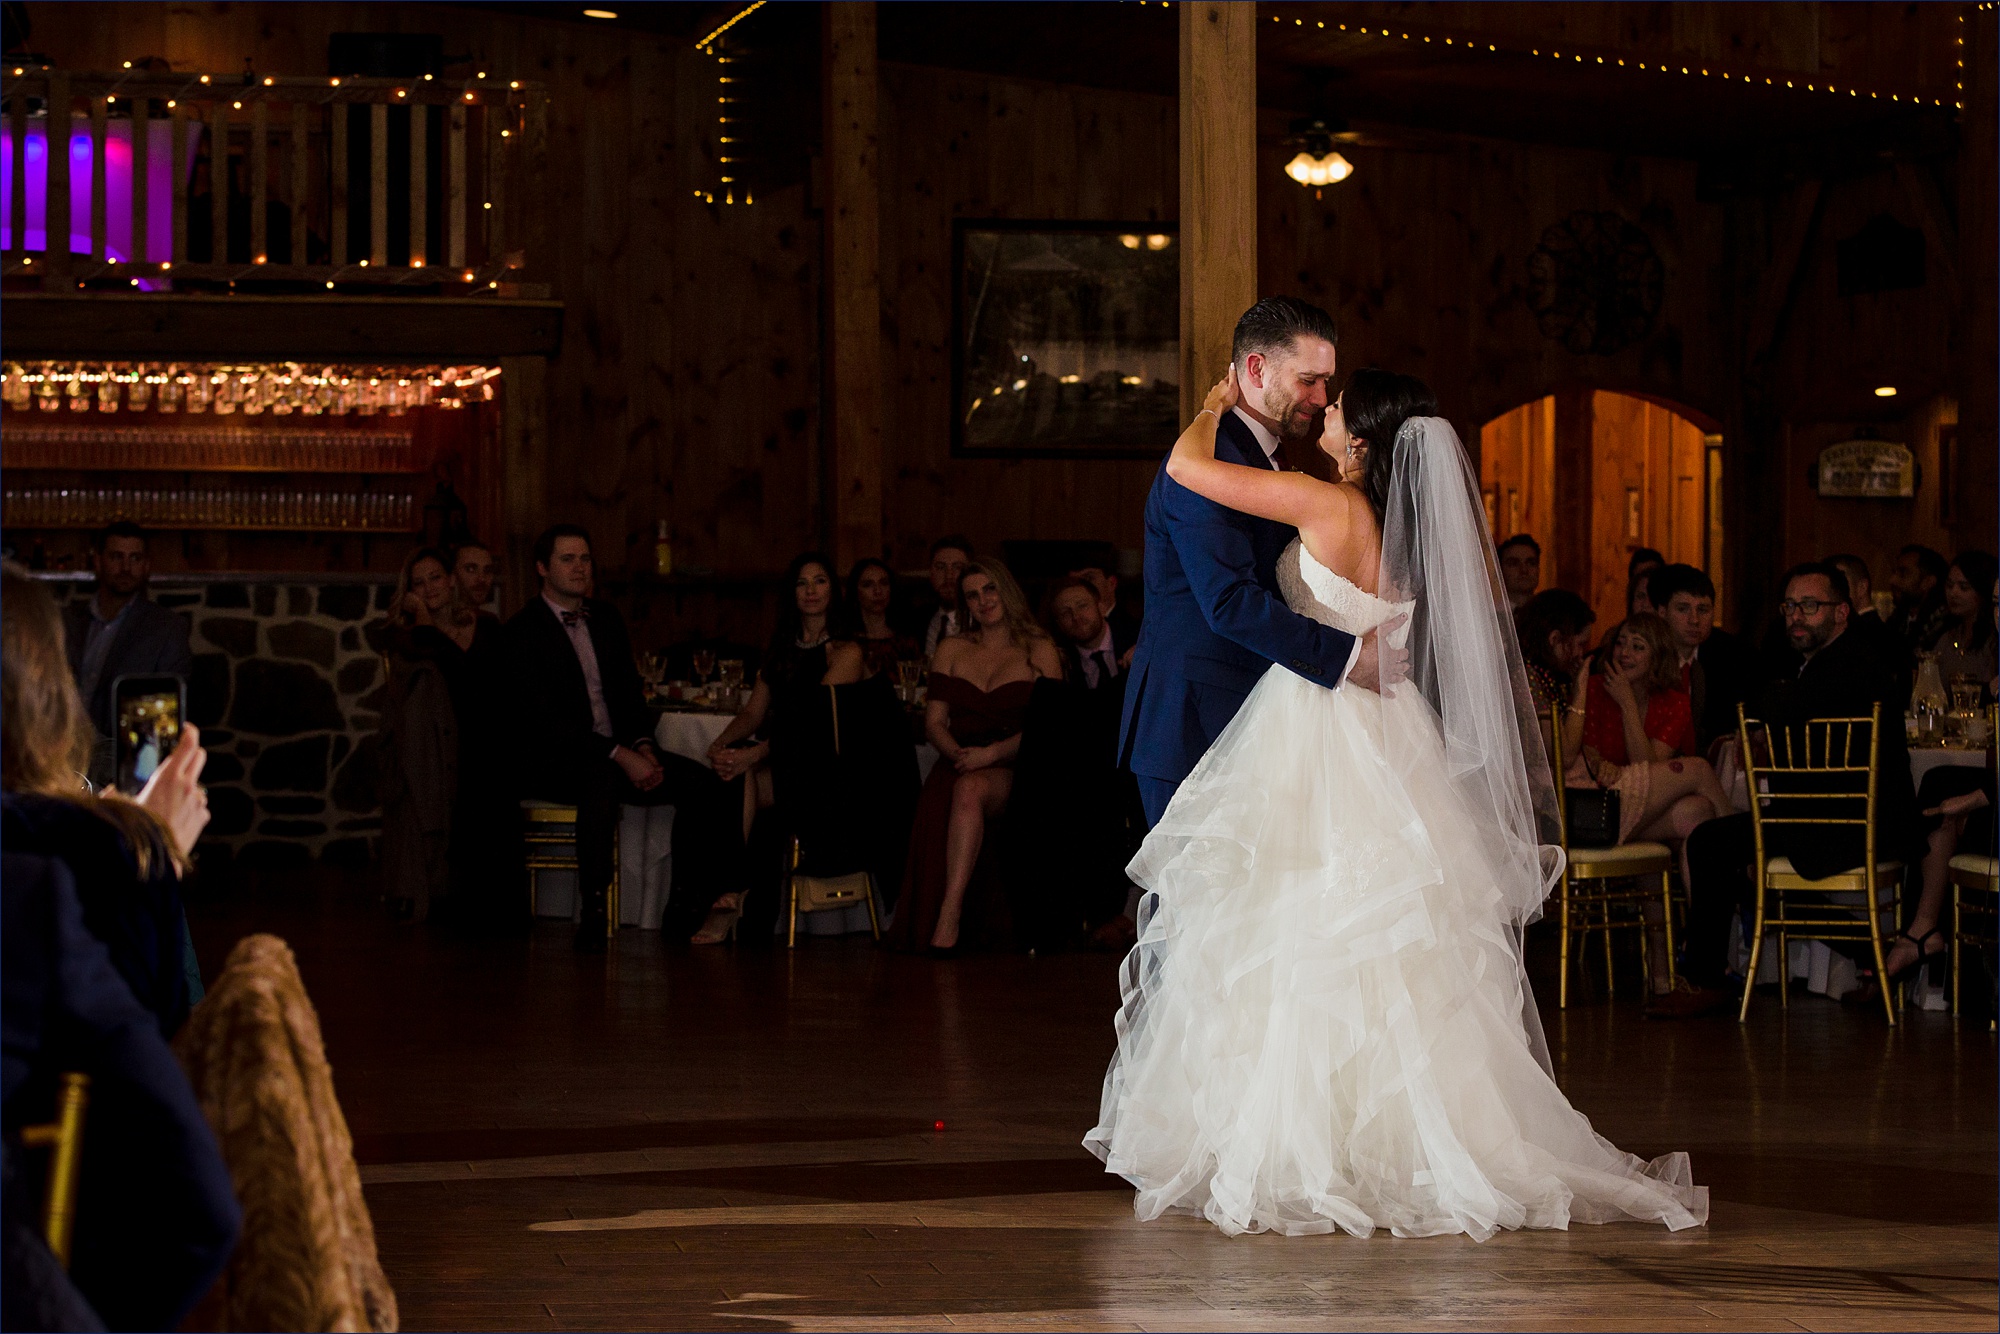 The bride and groom do their first dance at the wedding reception